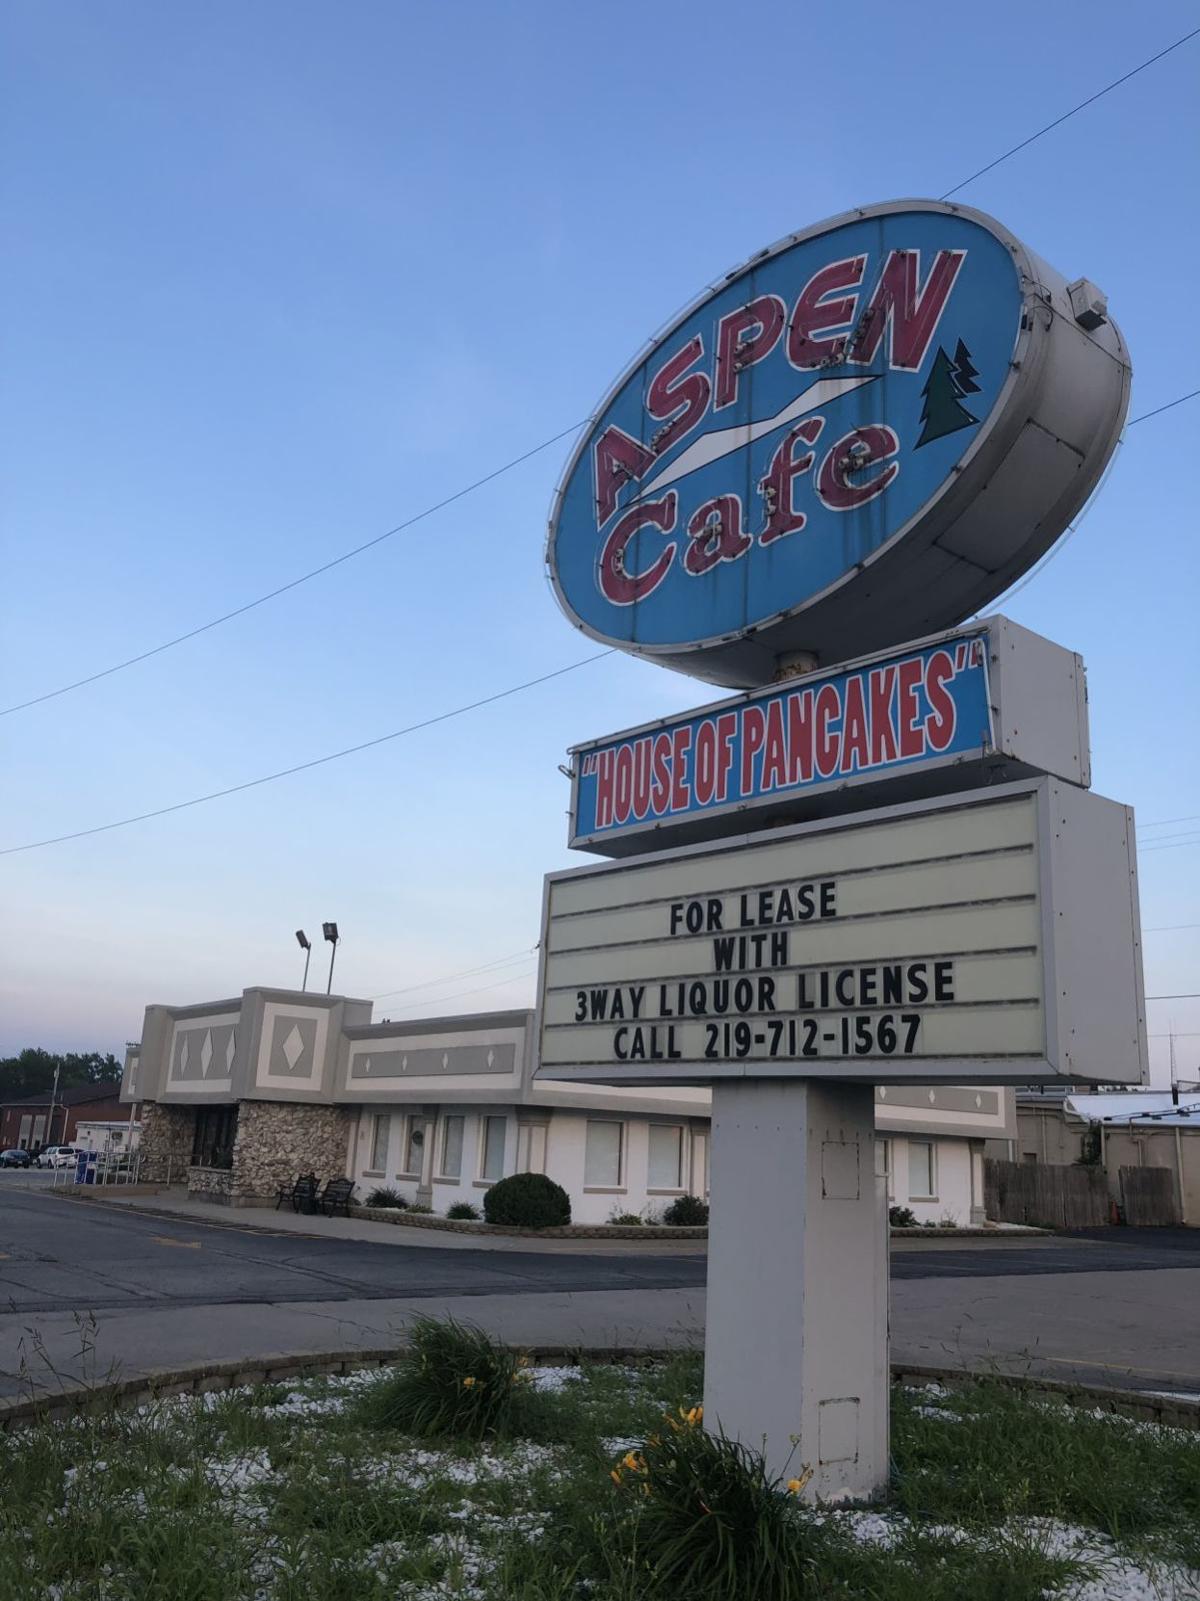 NWI Business Ins and Outs: Aspen Cafe closes after 30 years in St. John, the Pancake Club closes in Schererville, Pita Stop coming to Dyer